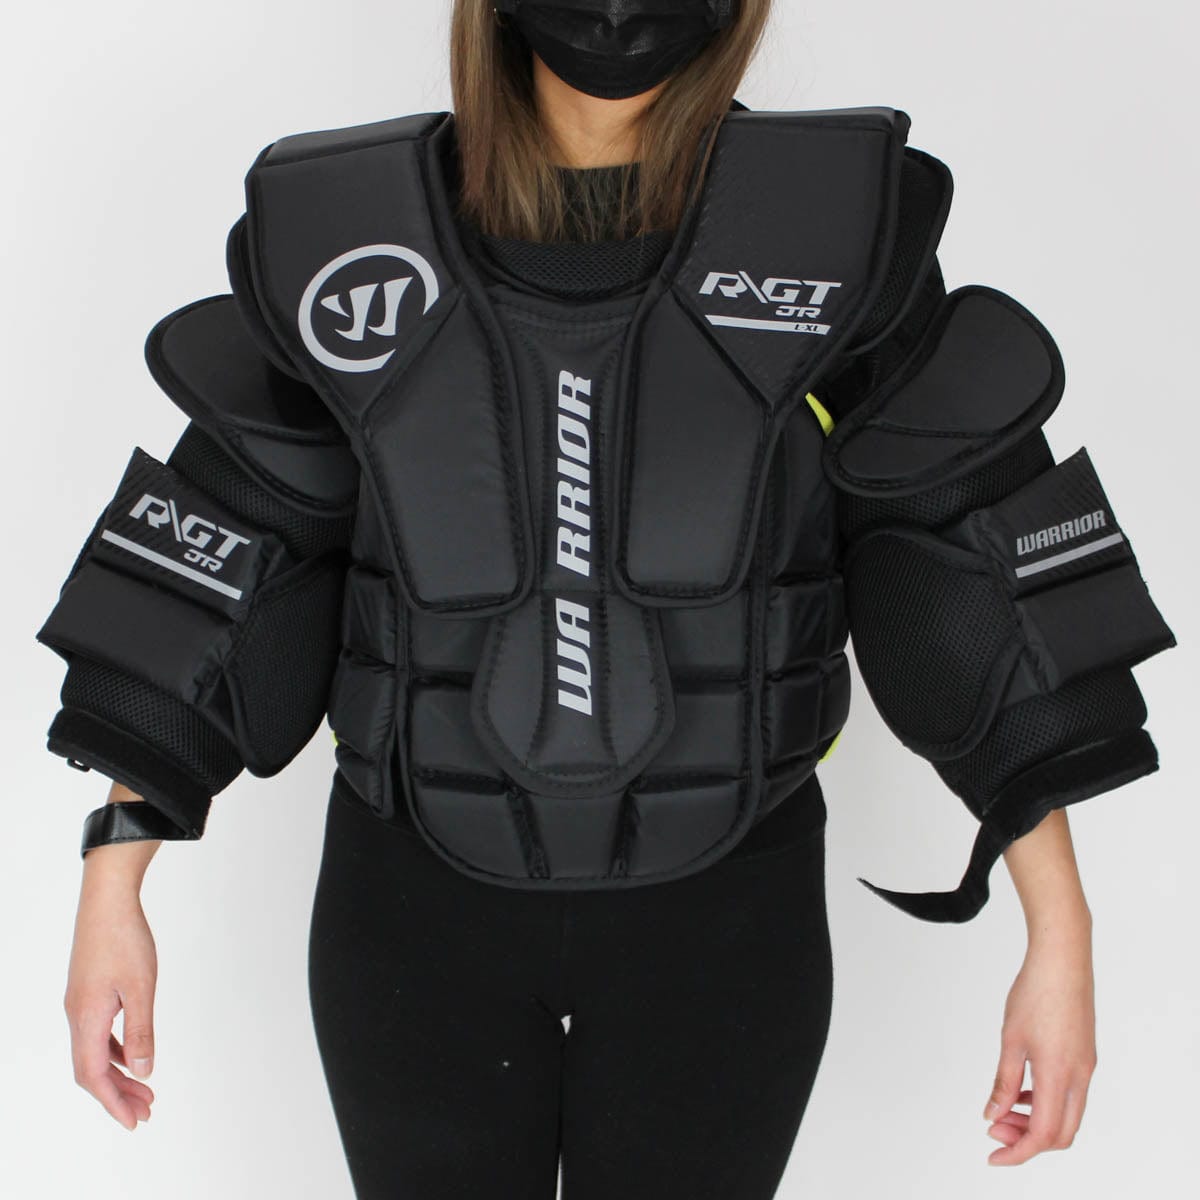 Warrior Ritual GT Junior Chest & Arm Protector